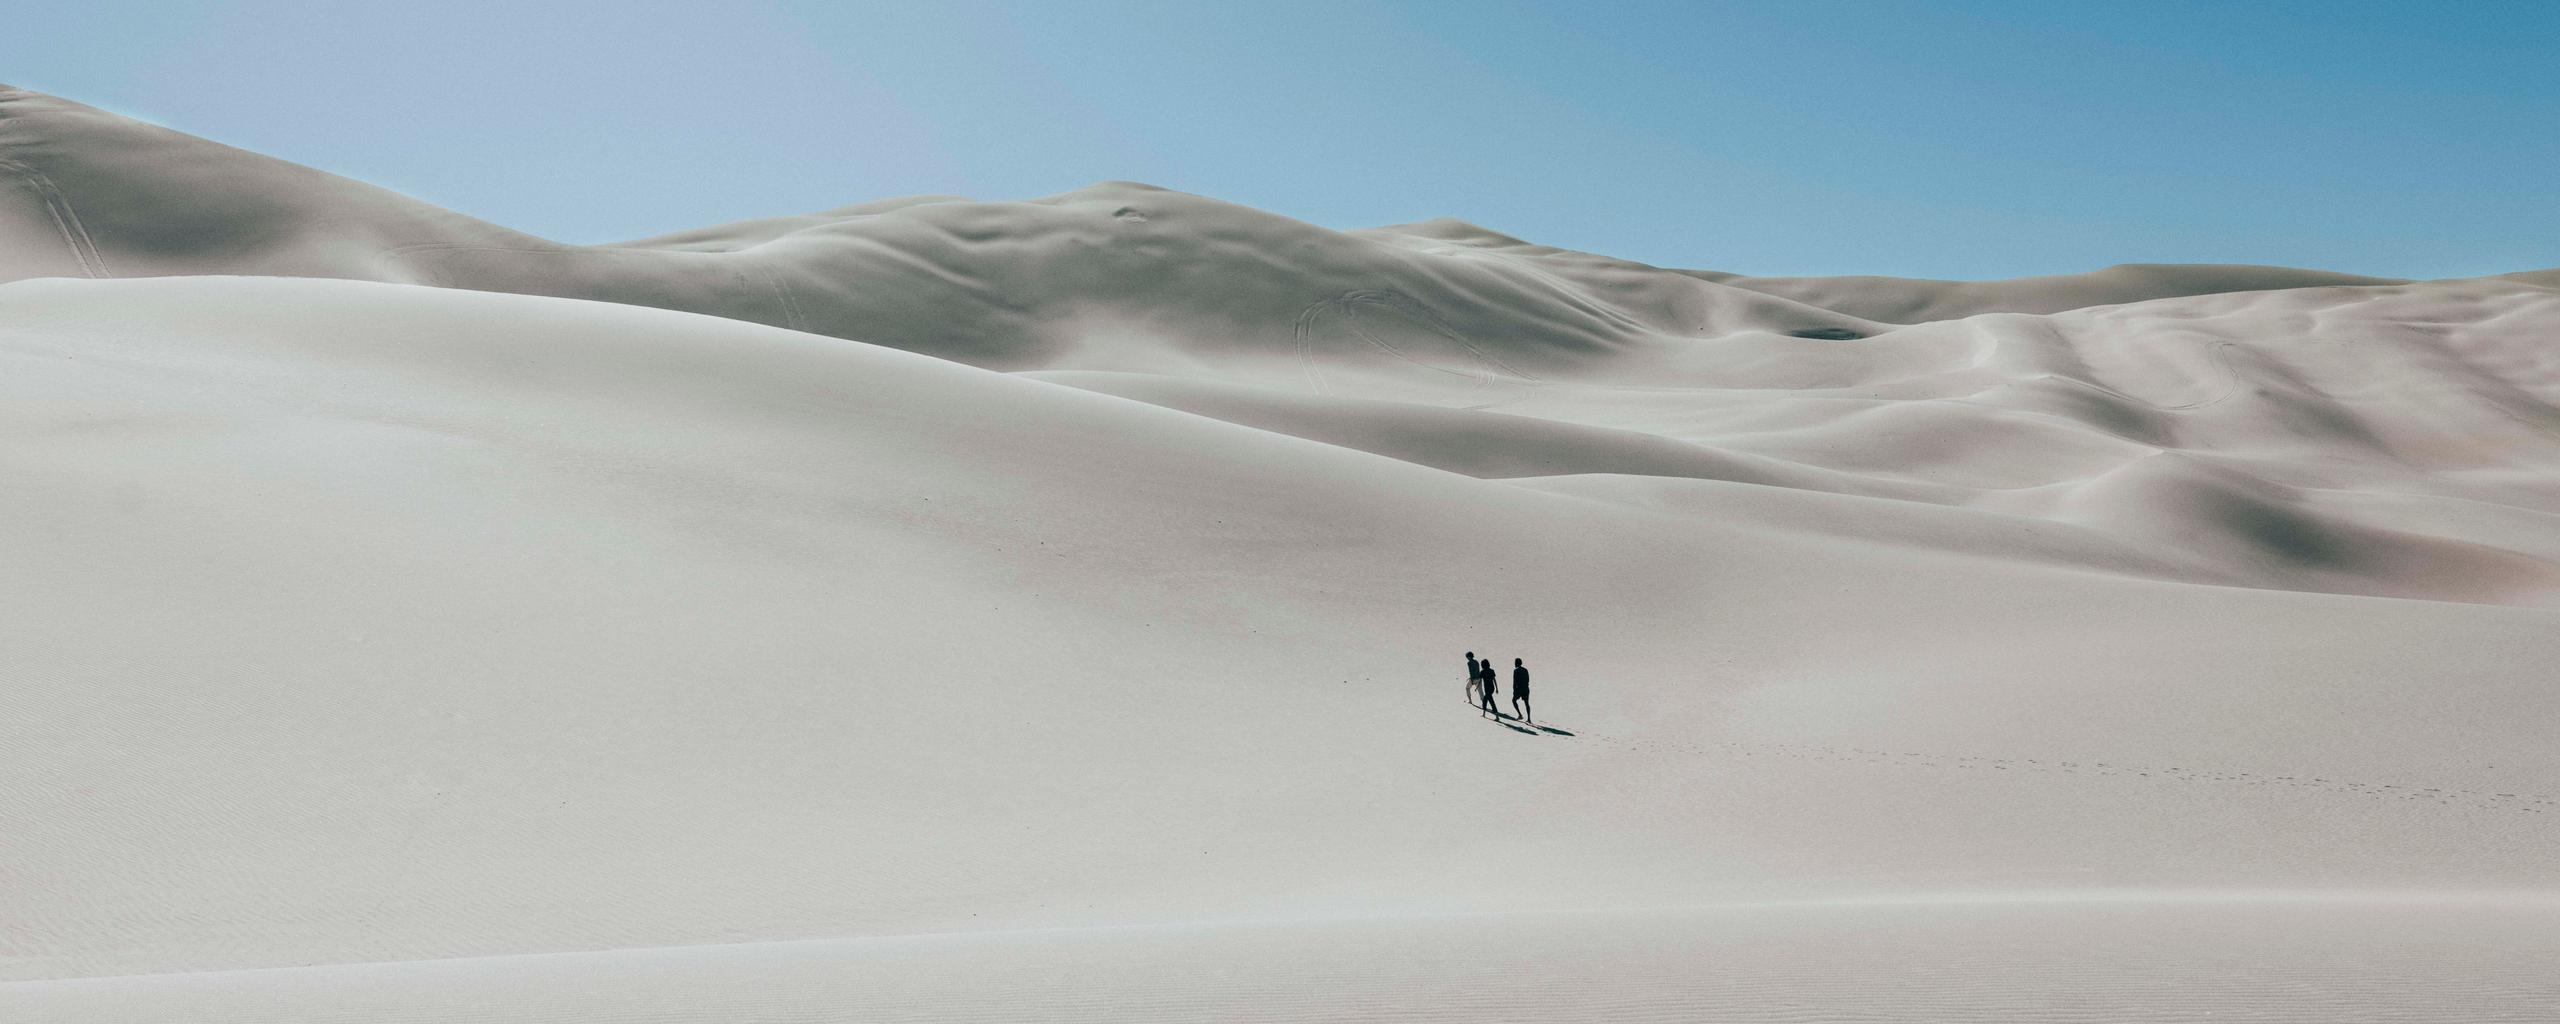 Three people walking on sand dunes in the distance